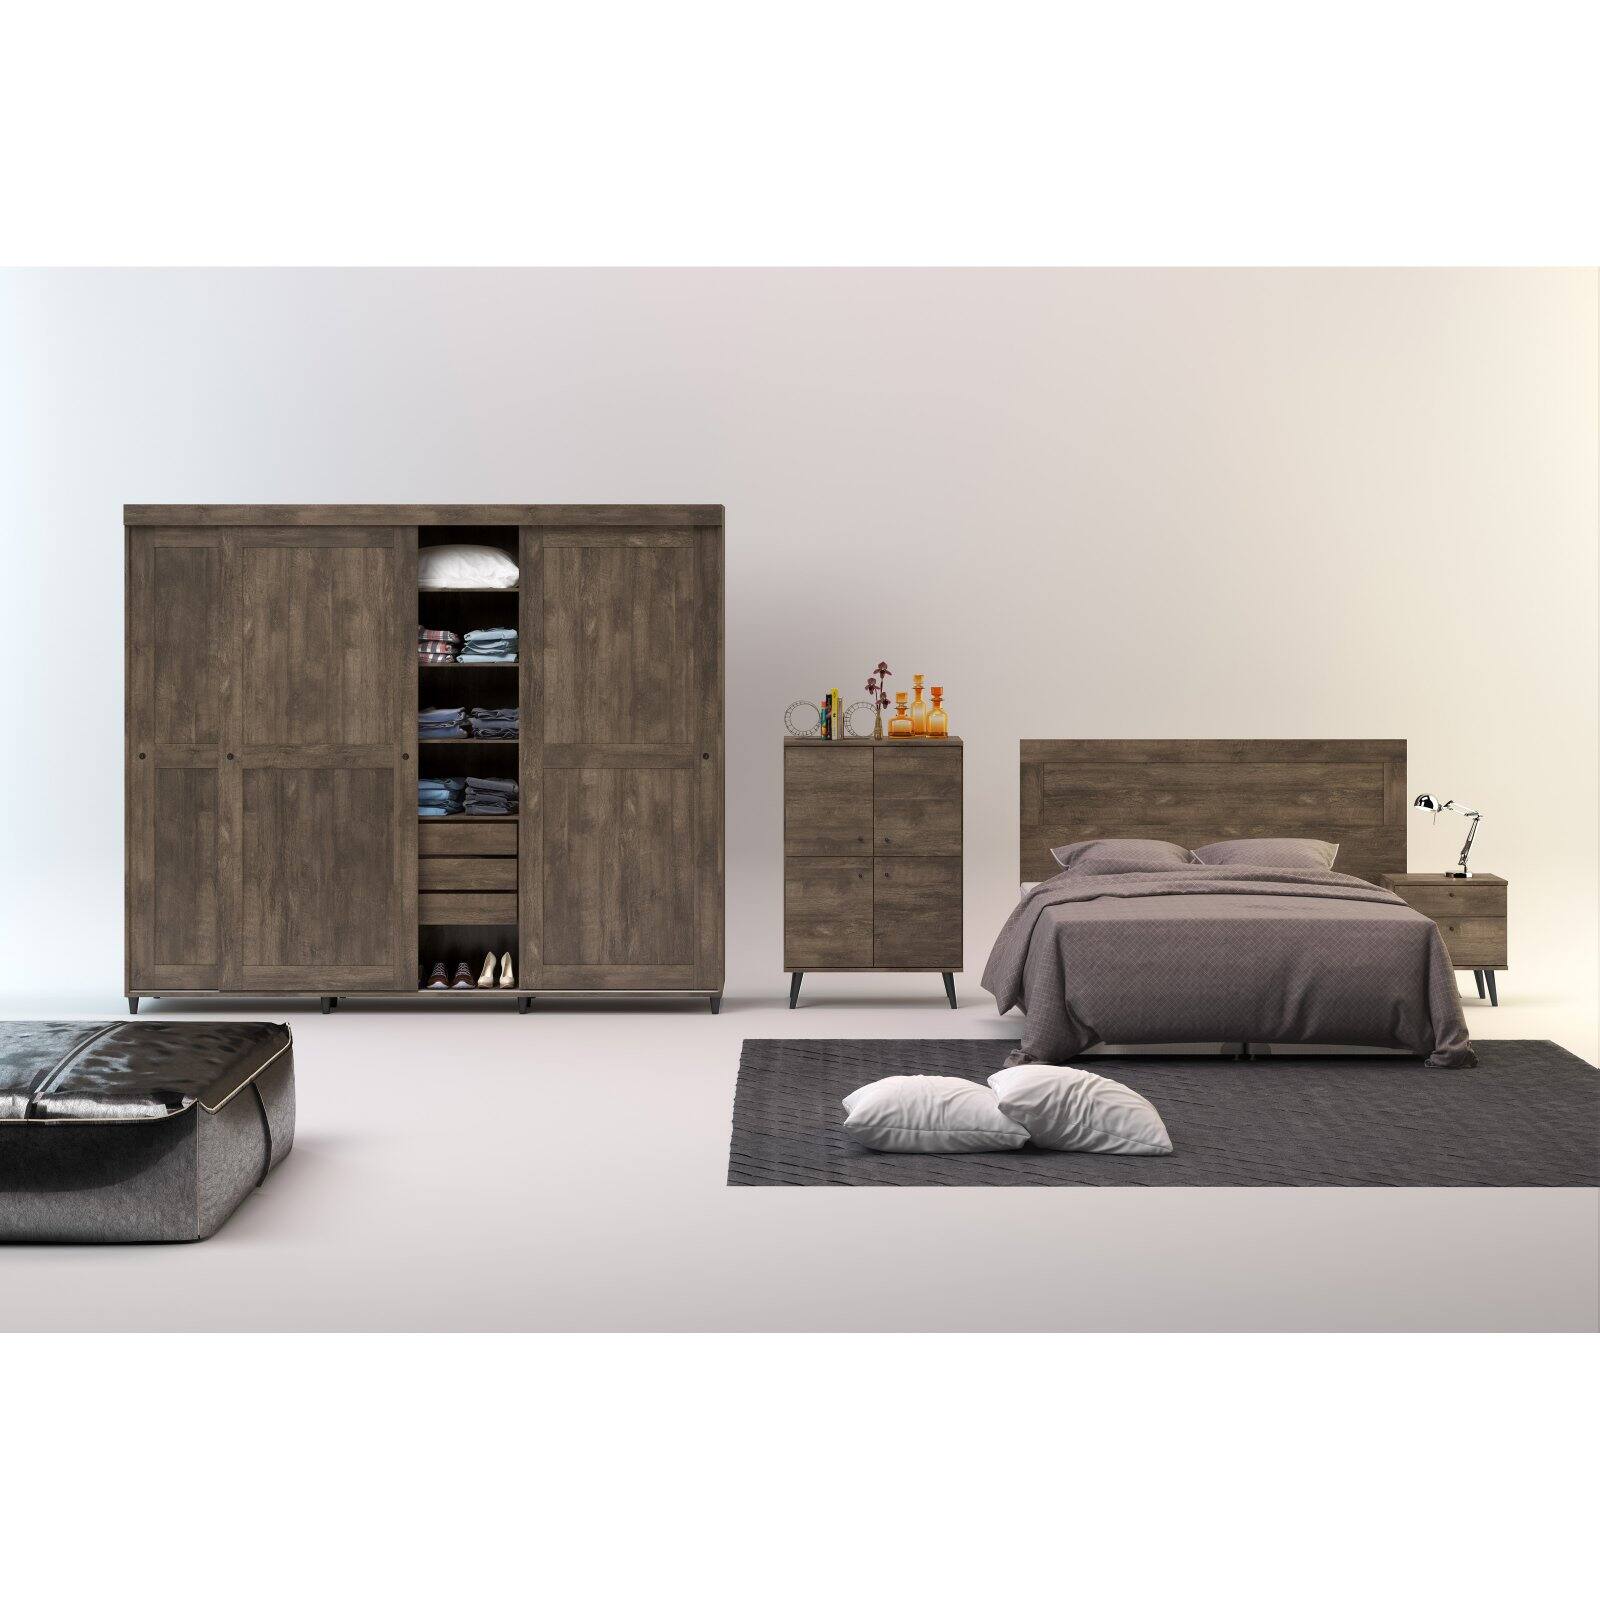 Midtown Concept Kansas Mid-Century Platform Bed with Headboard - image 3 of 11